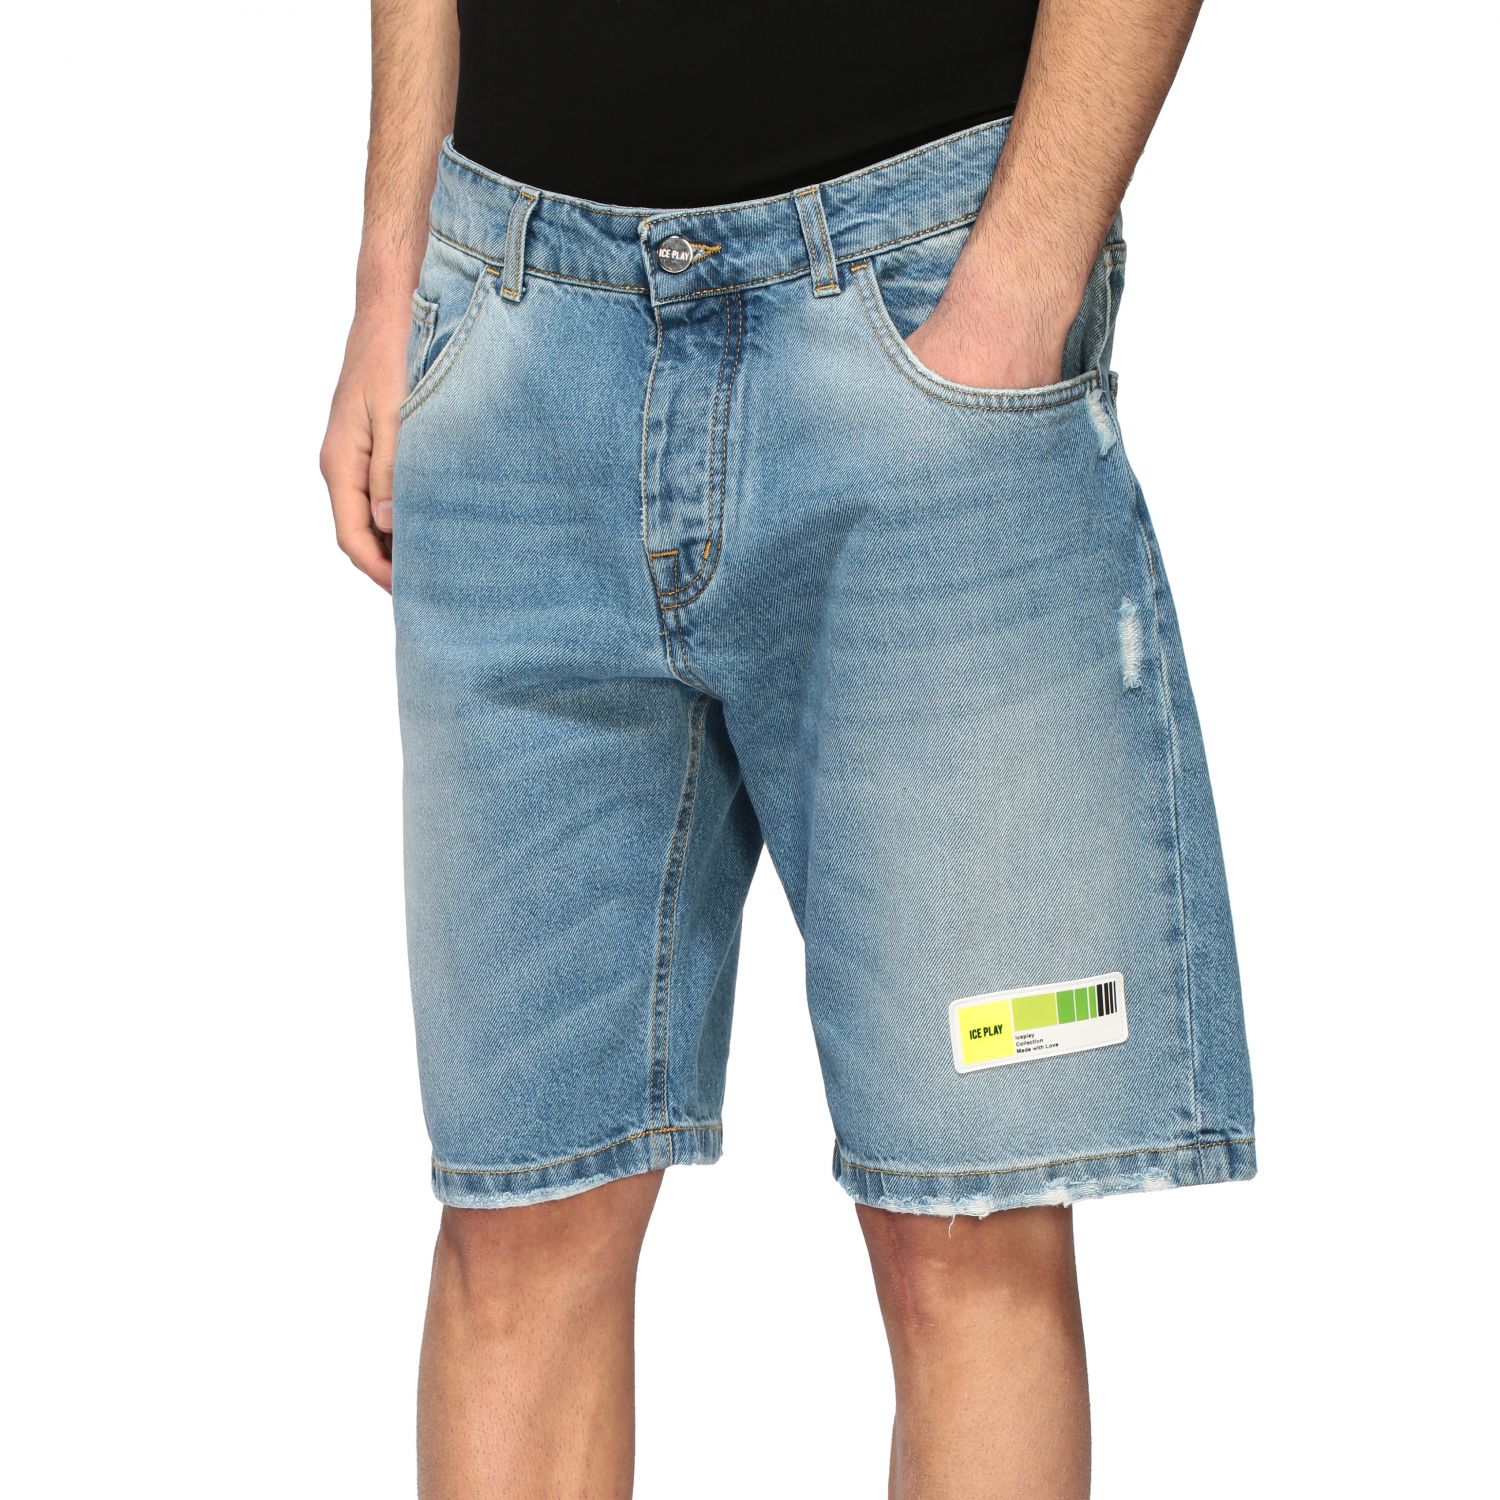 Ice Play Outlet: Jeans men | Short Ice Play Men Stone Washed | Short ...